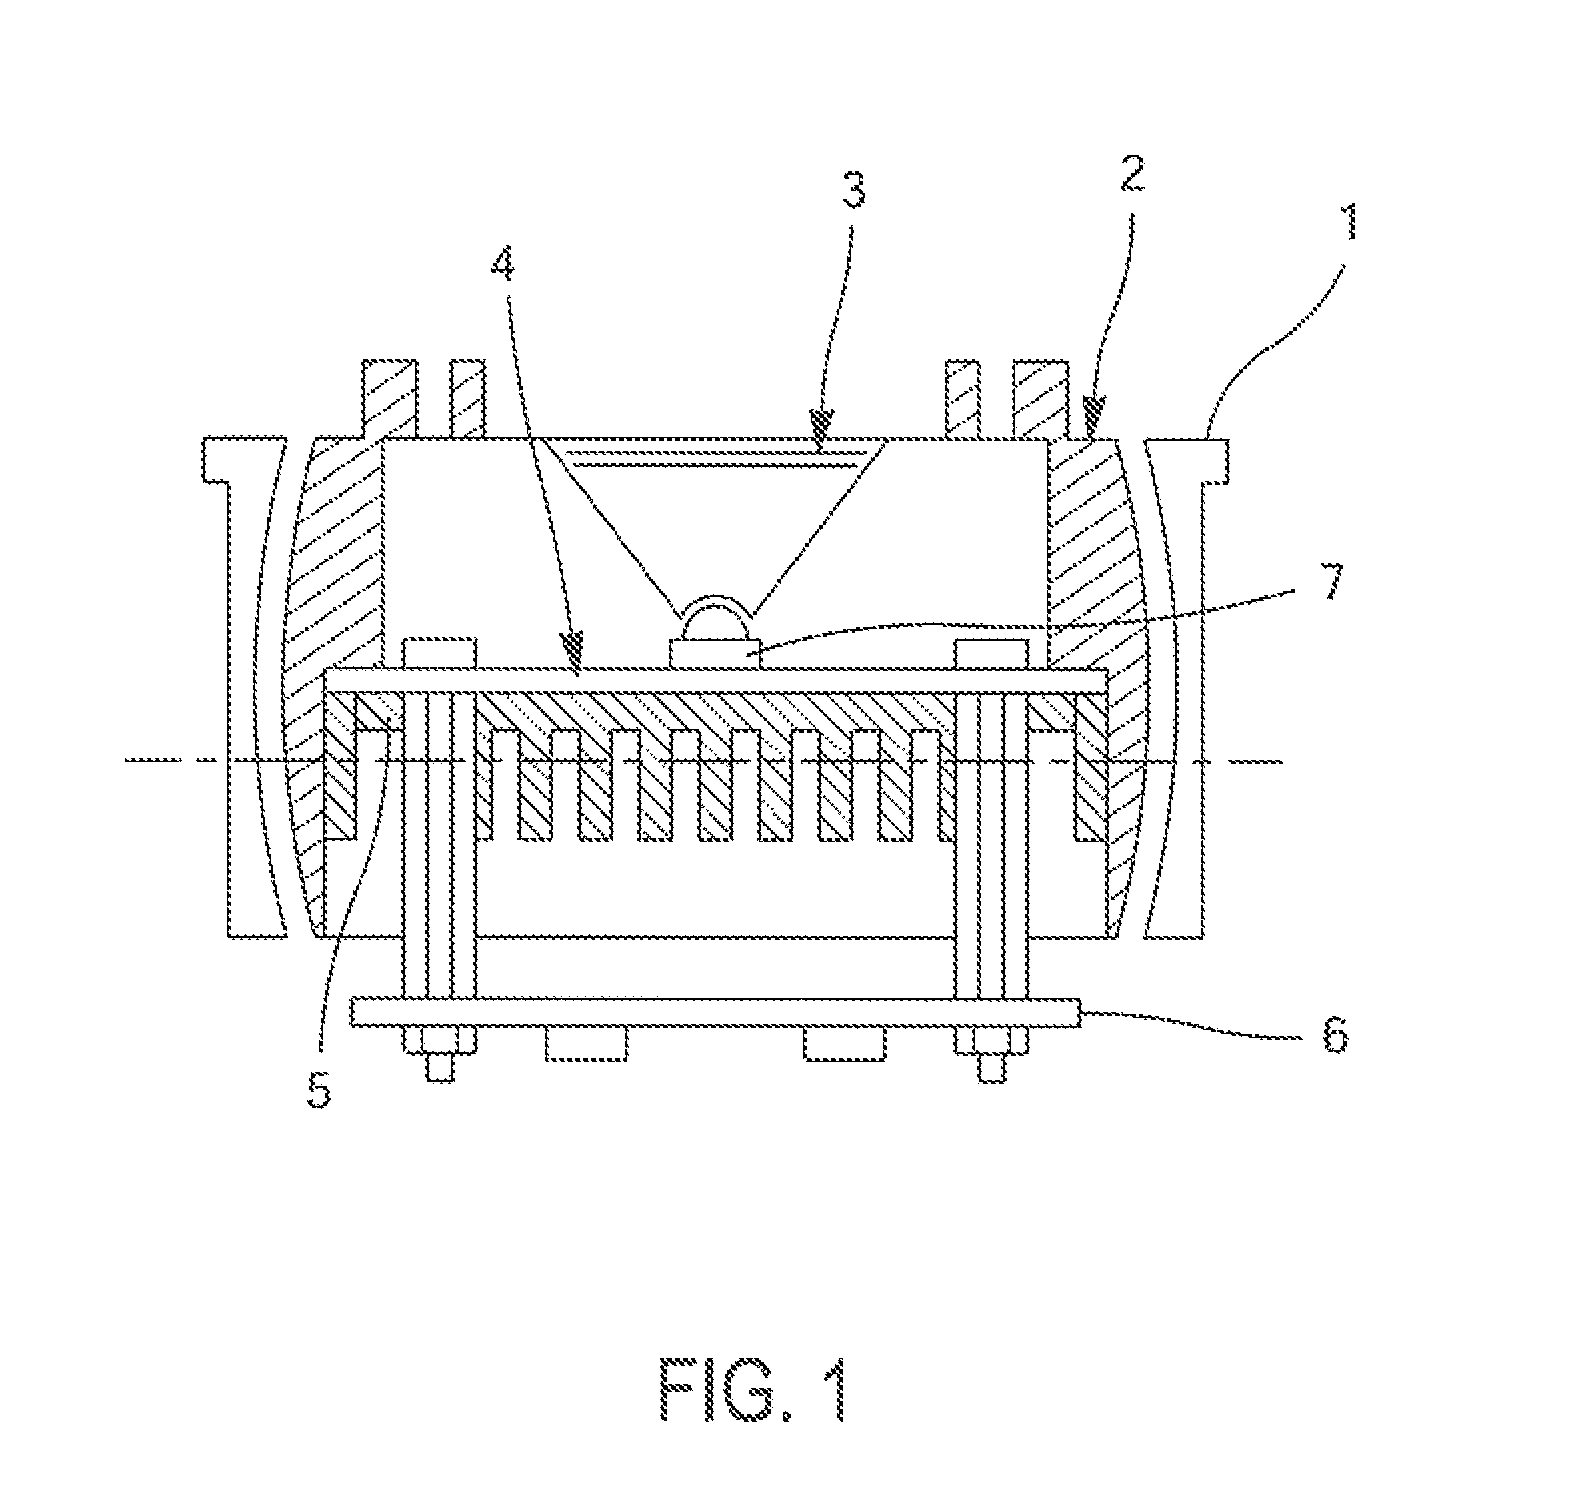 Lighting device such as a LED reading light